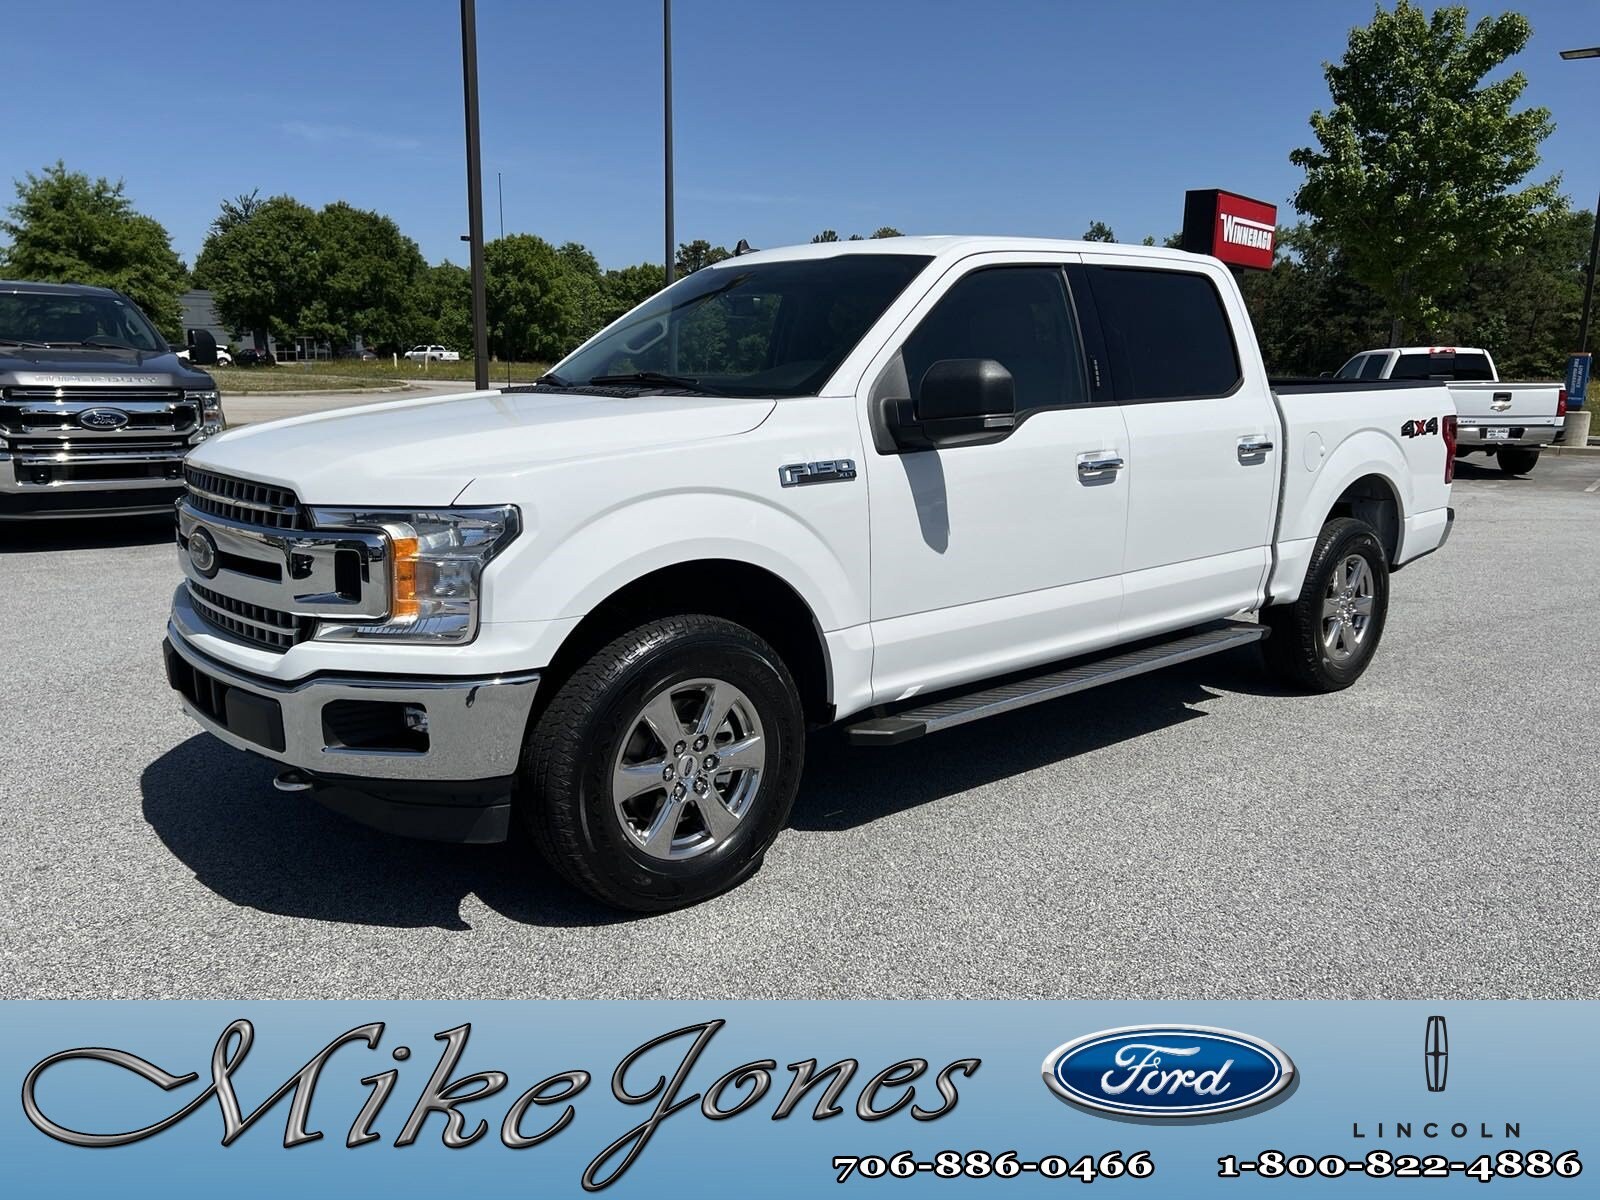 2019 Ford F-150 Crew Cab Short Bed Truck 